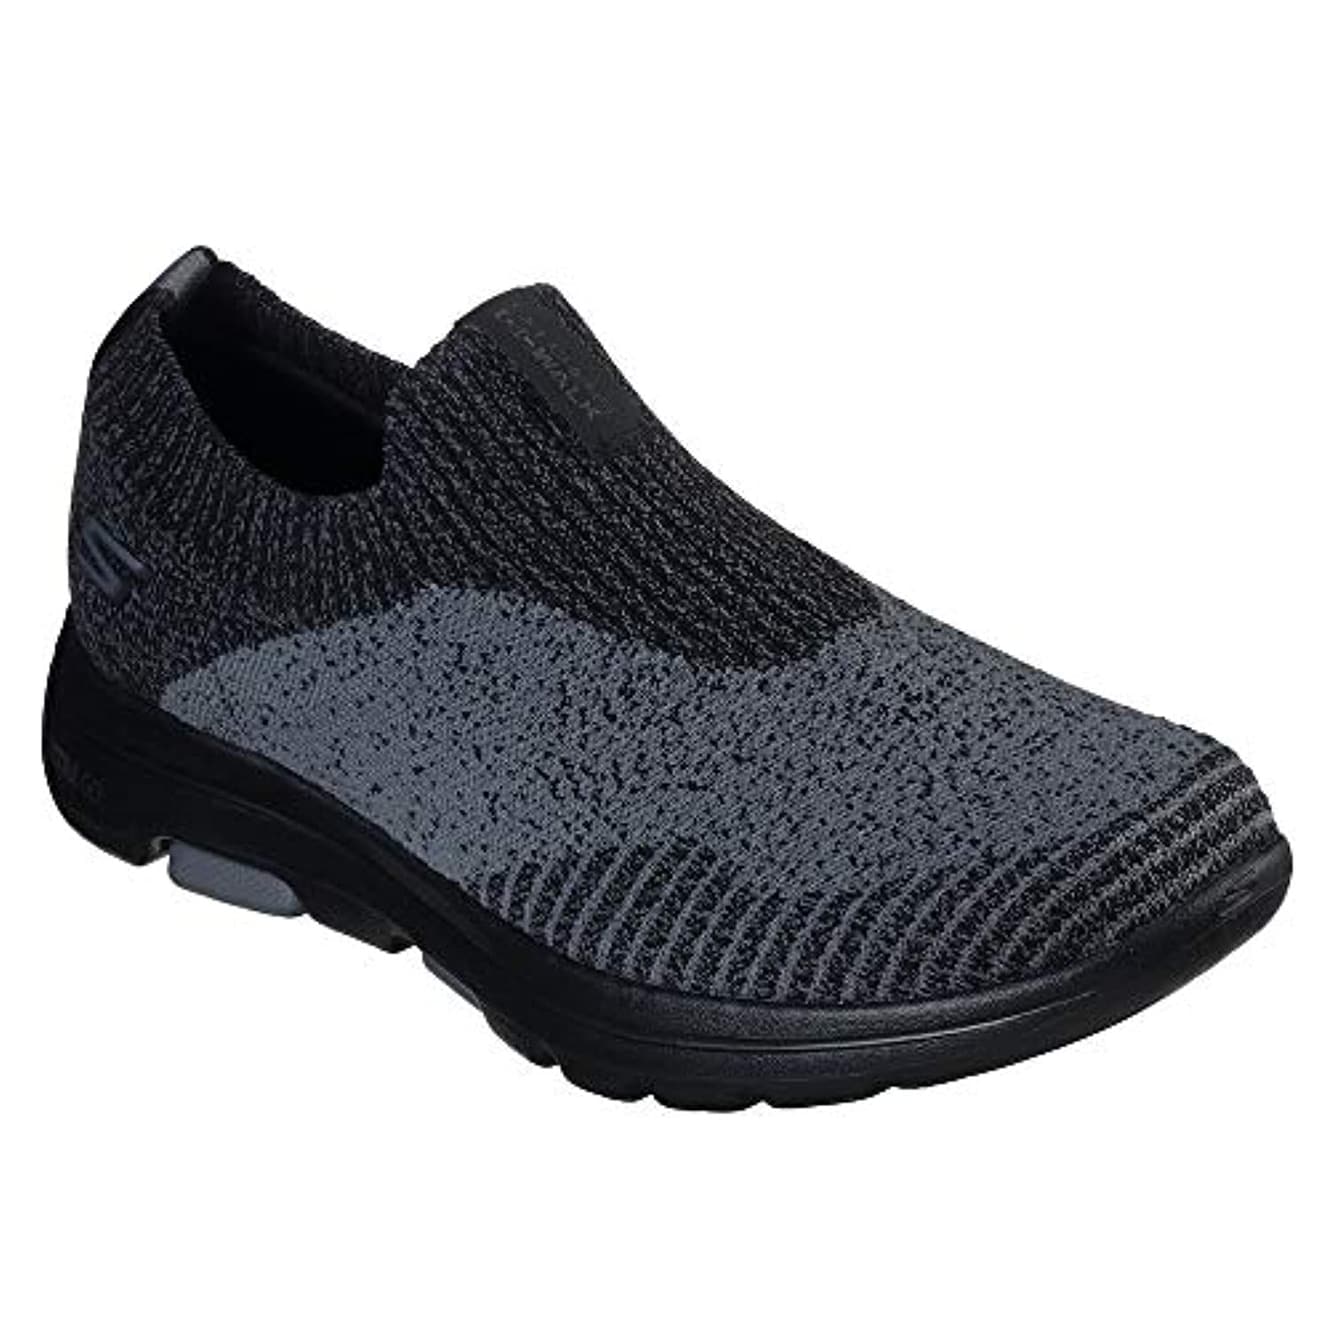 skechers shoes stretch knit